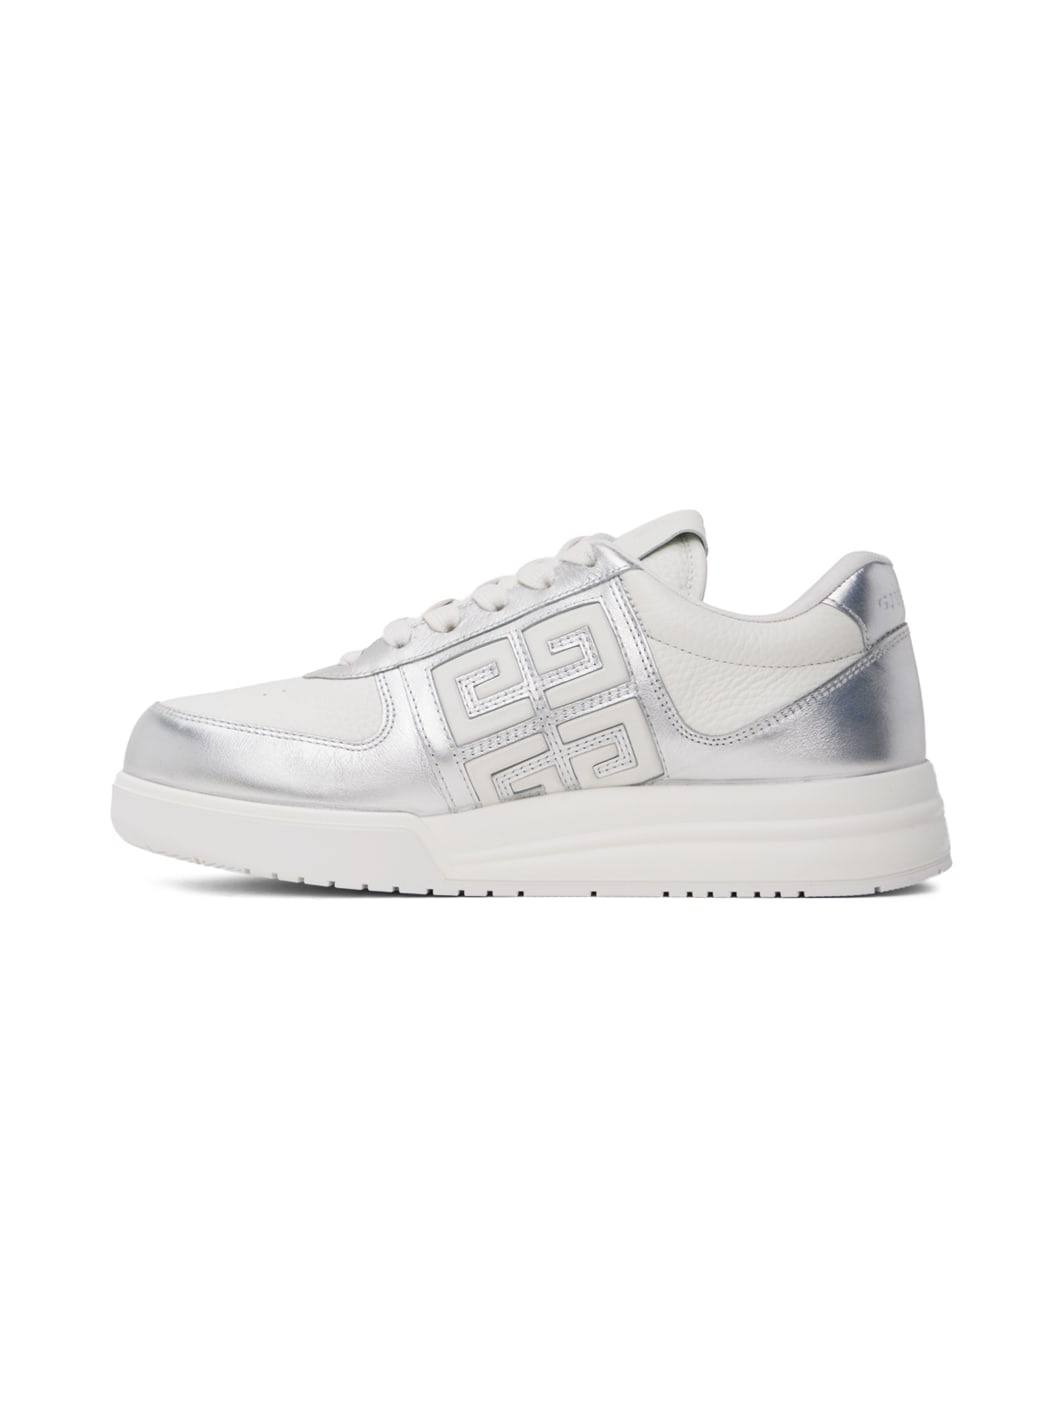 White & Silver G4 Sneakers - 3